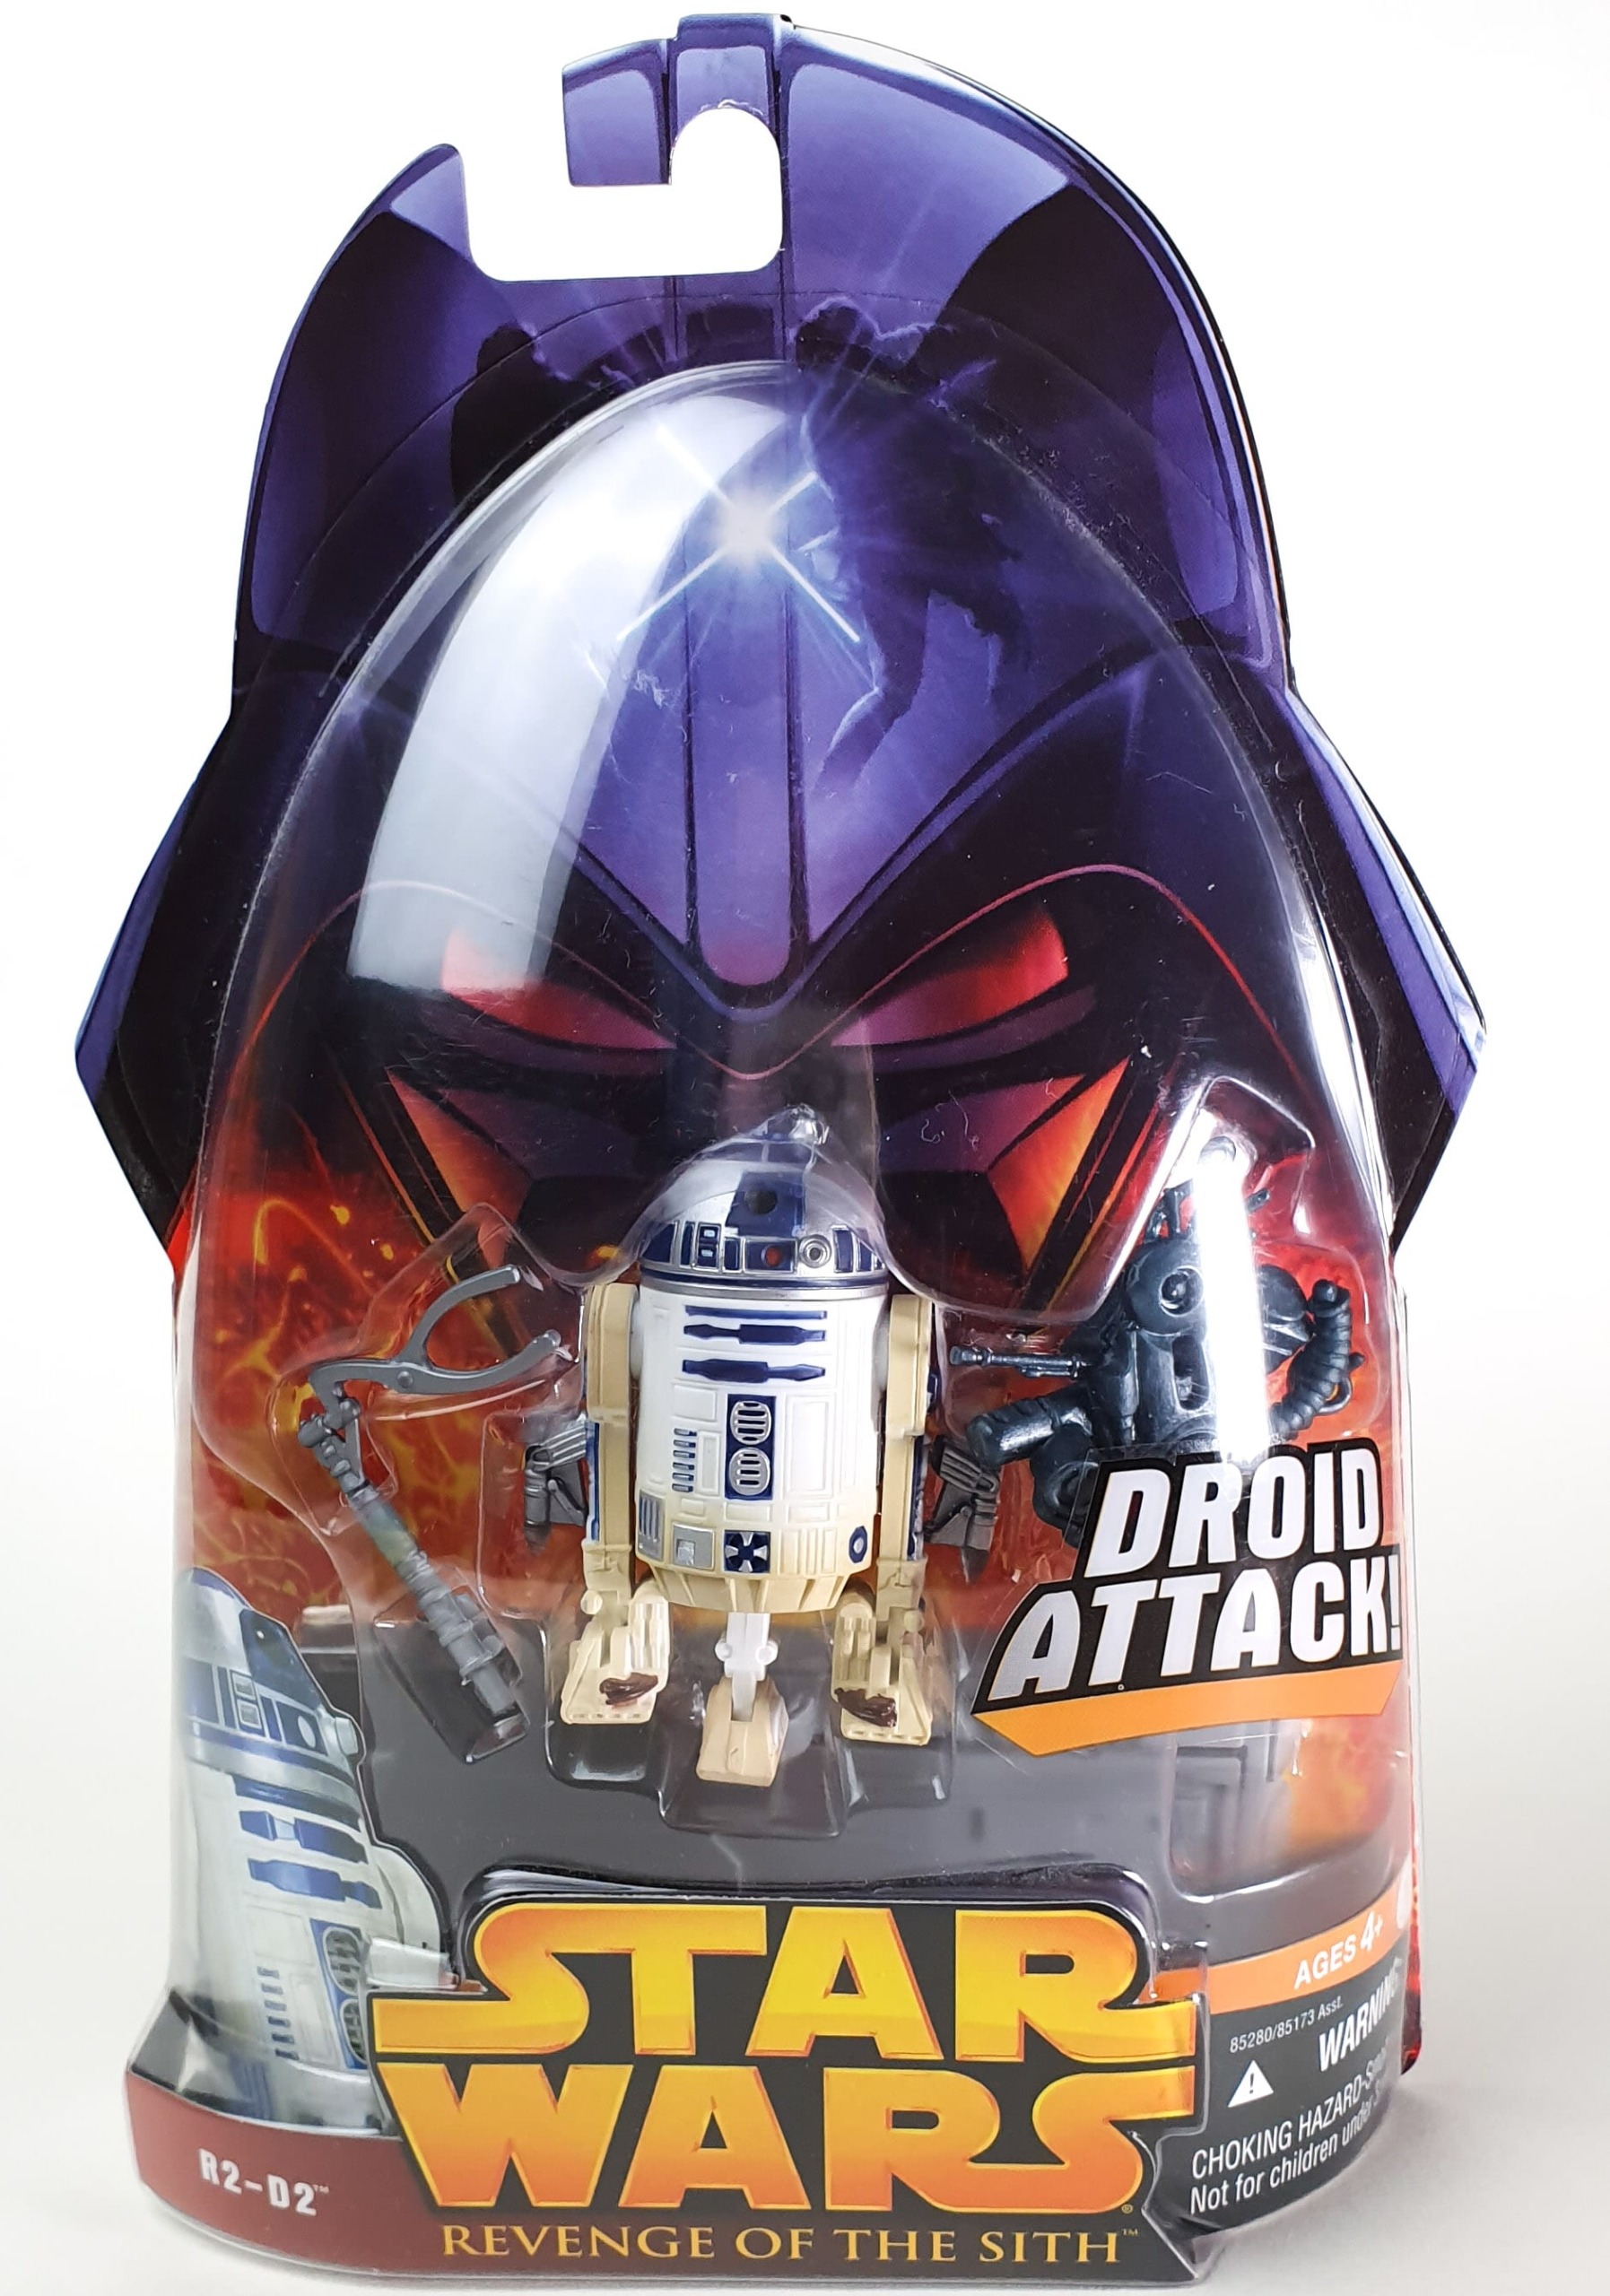 R2-D2 Droid Attack Action Figure for sale online Hasbro Revenge of the Sith 